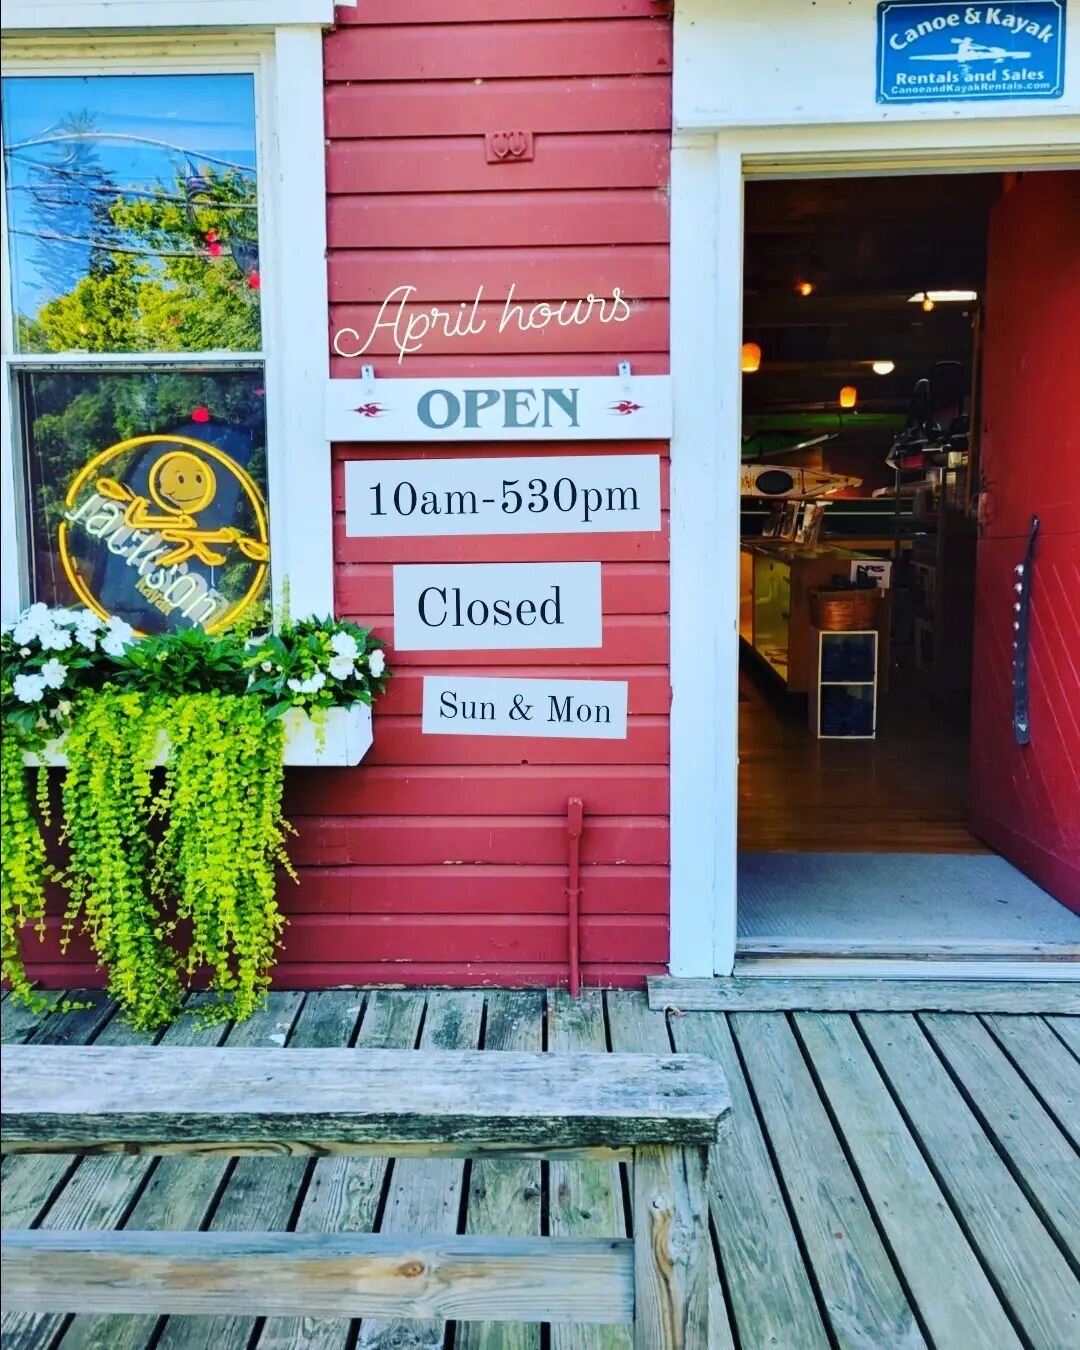 Our doors are open 10am-530pm, Tuesday - Saturday during the month of April. We look forward to seeing you on the water!
&bull;
#kickbackandkayak 
&bull;
@canoeandkayakrentalsandsales